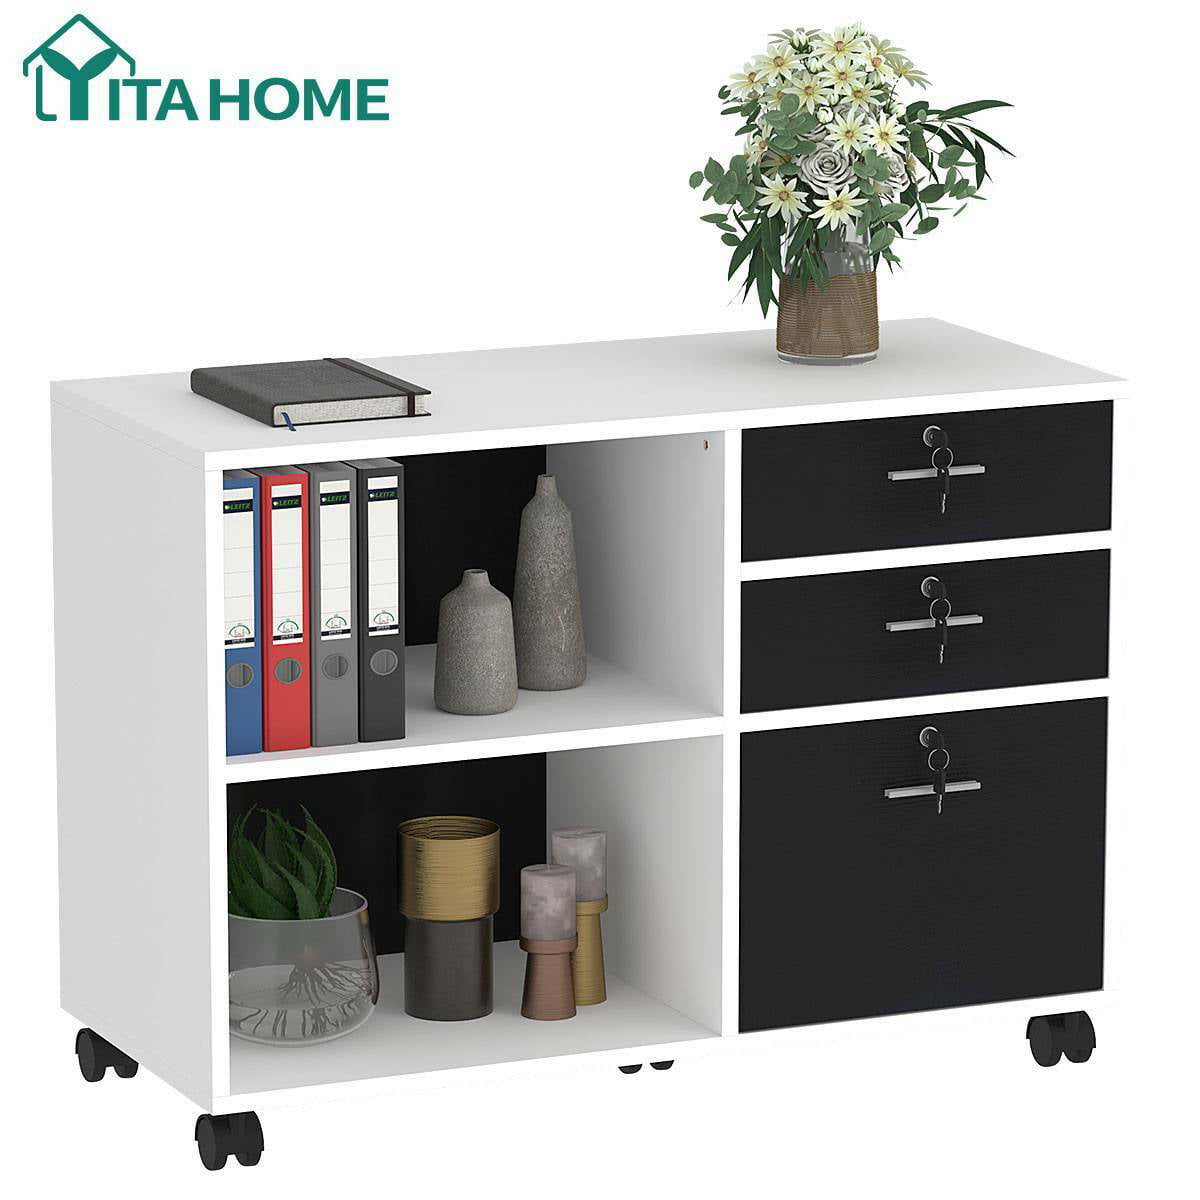 YITAHOME 3 Drawer Wood File Lateral Organizer Home